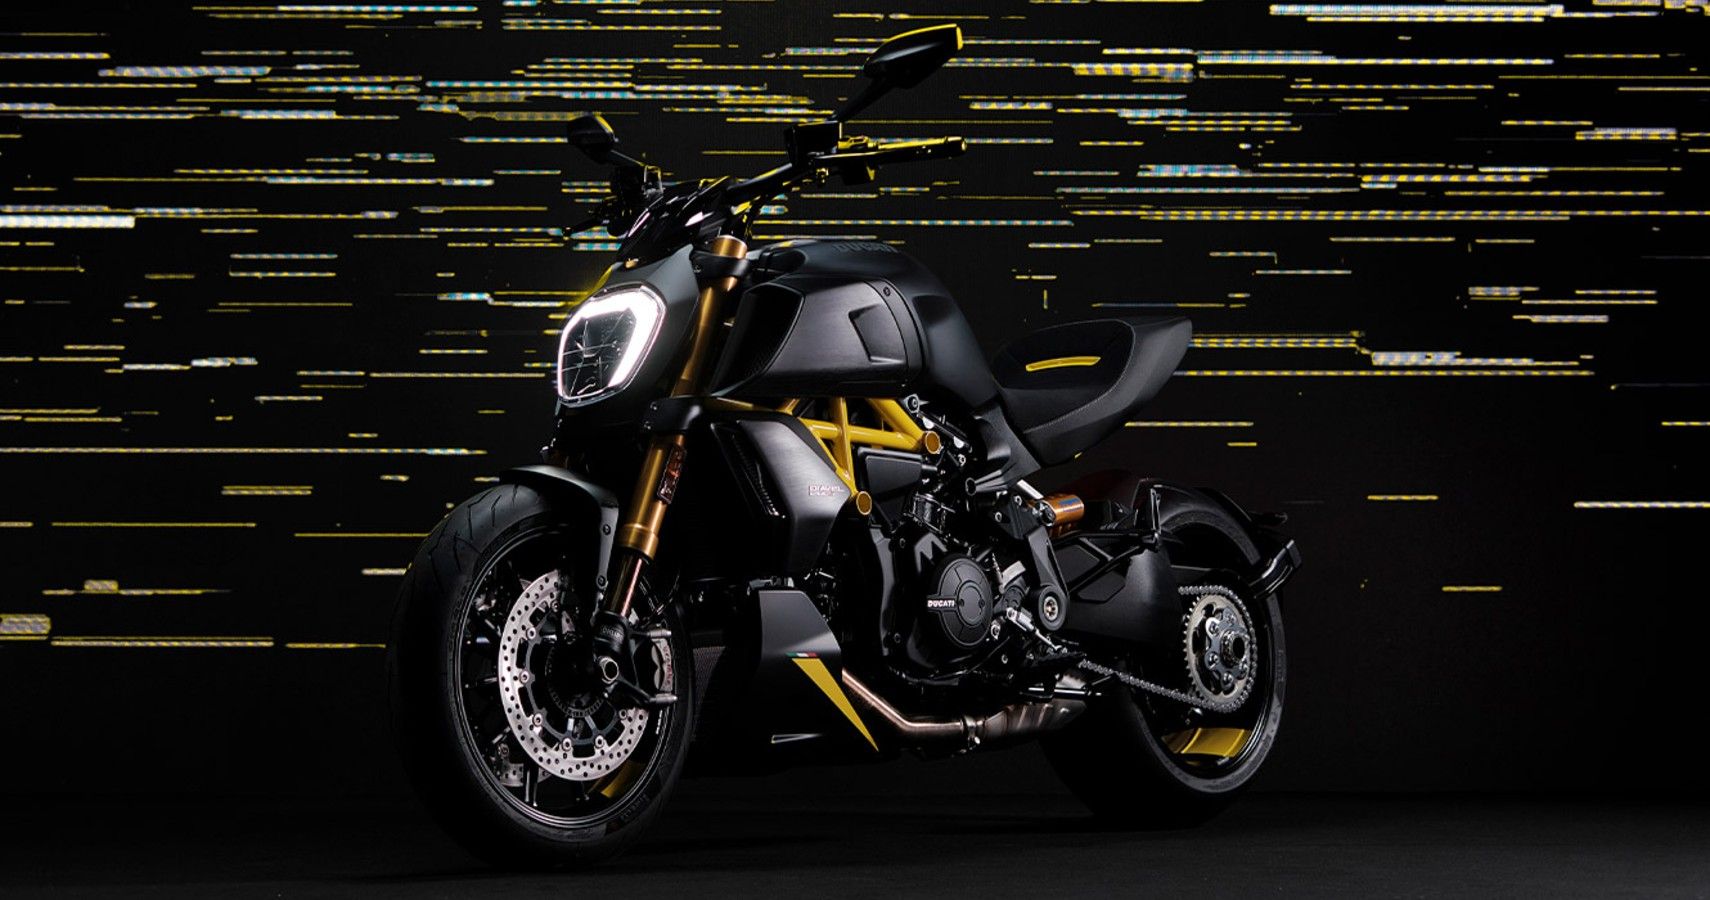 A 2022 Ducati Diavel 1260 S Black and Steel edition.